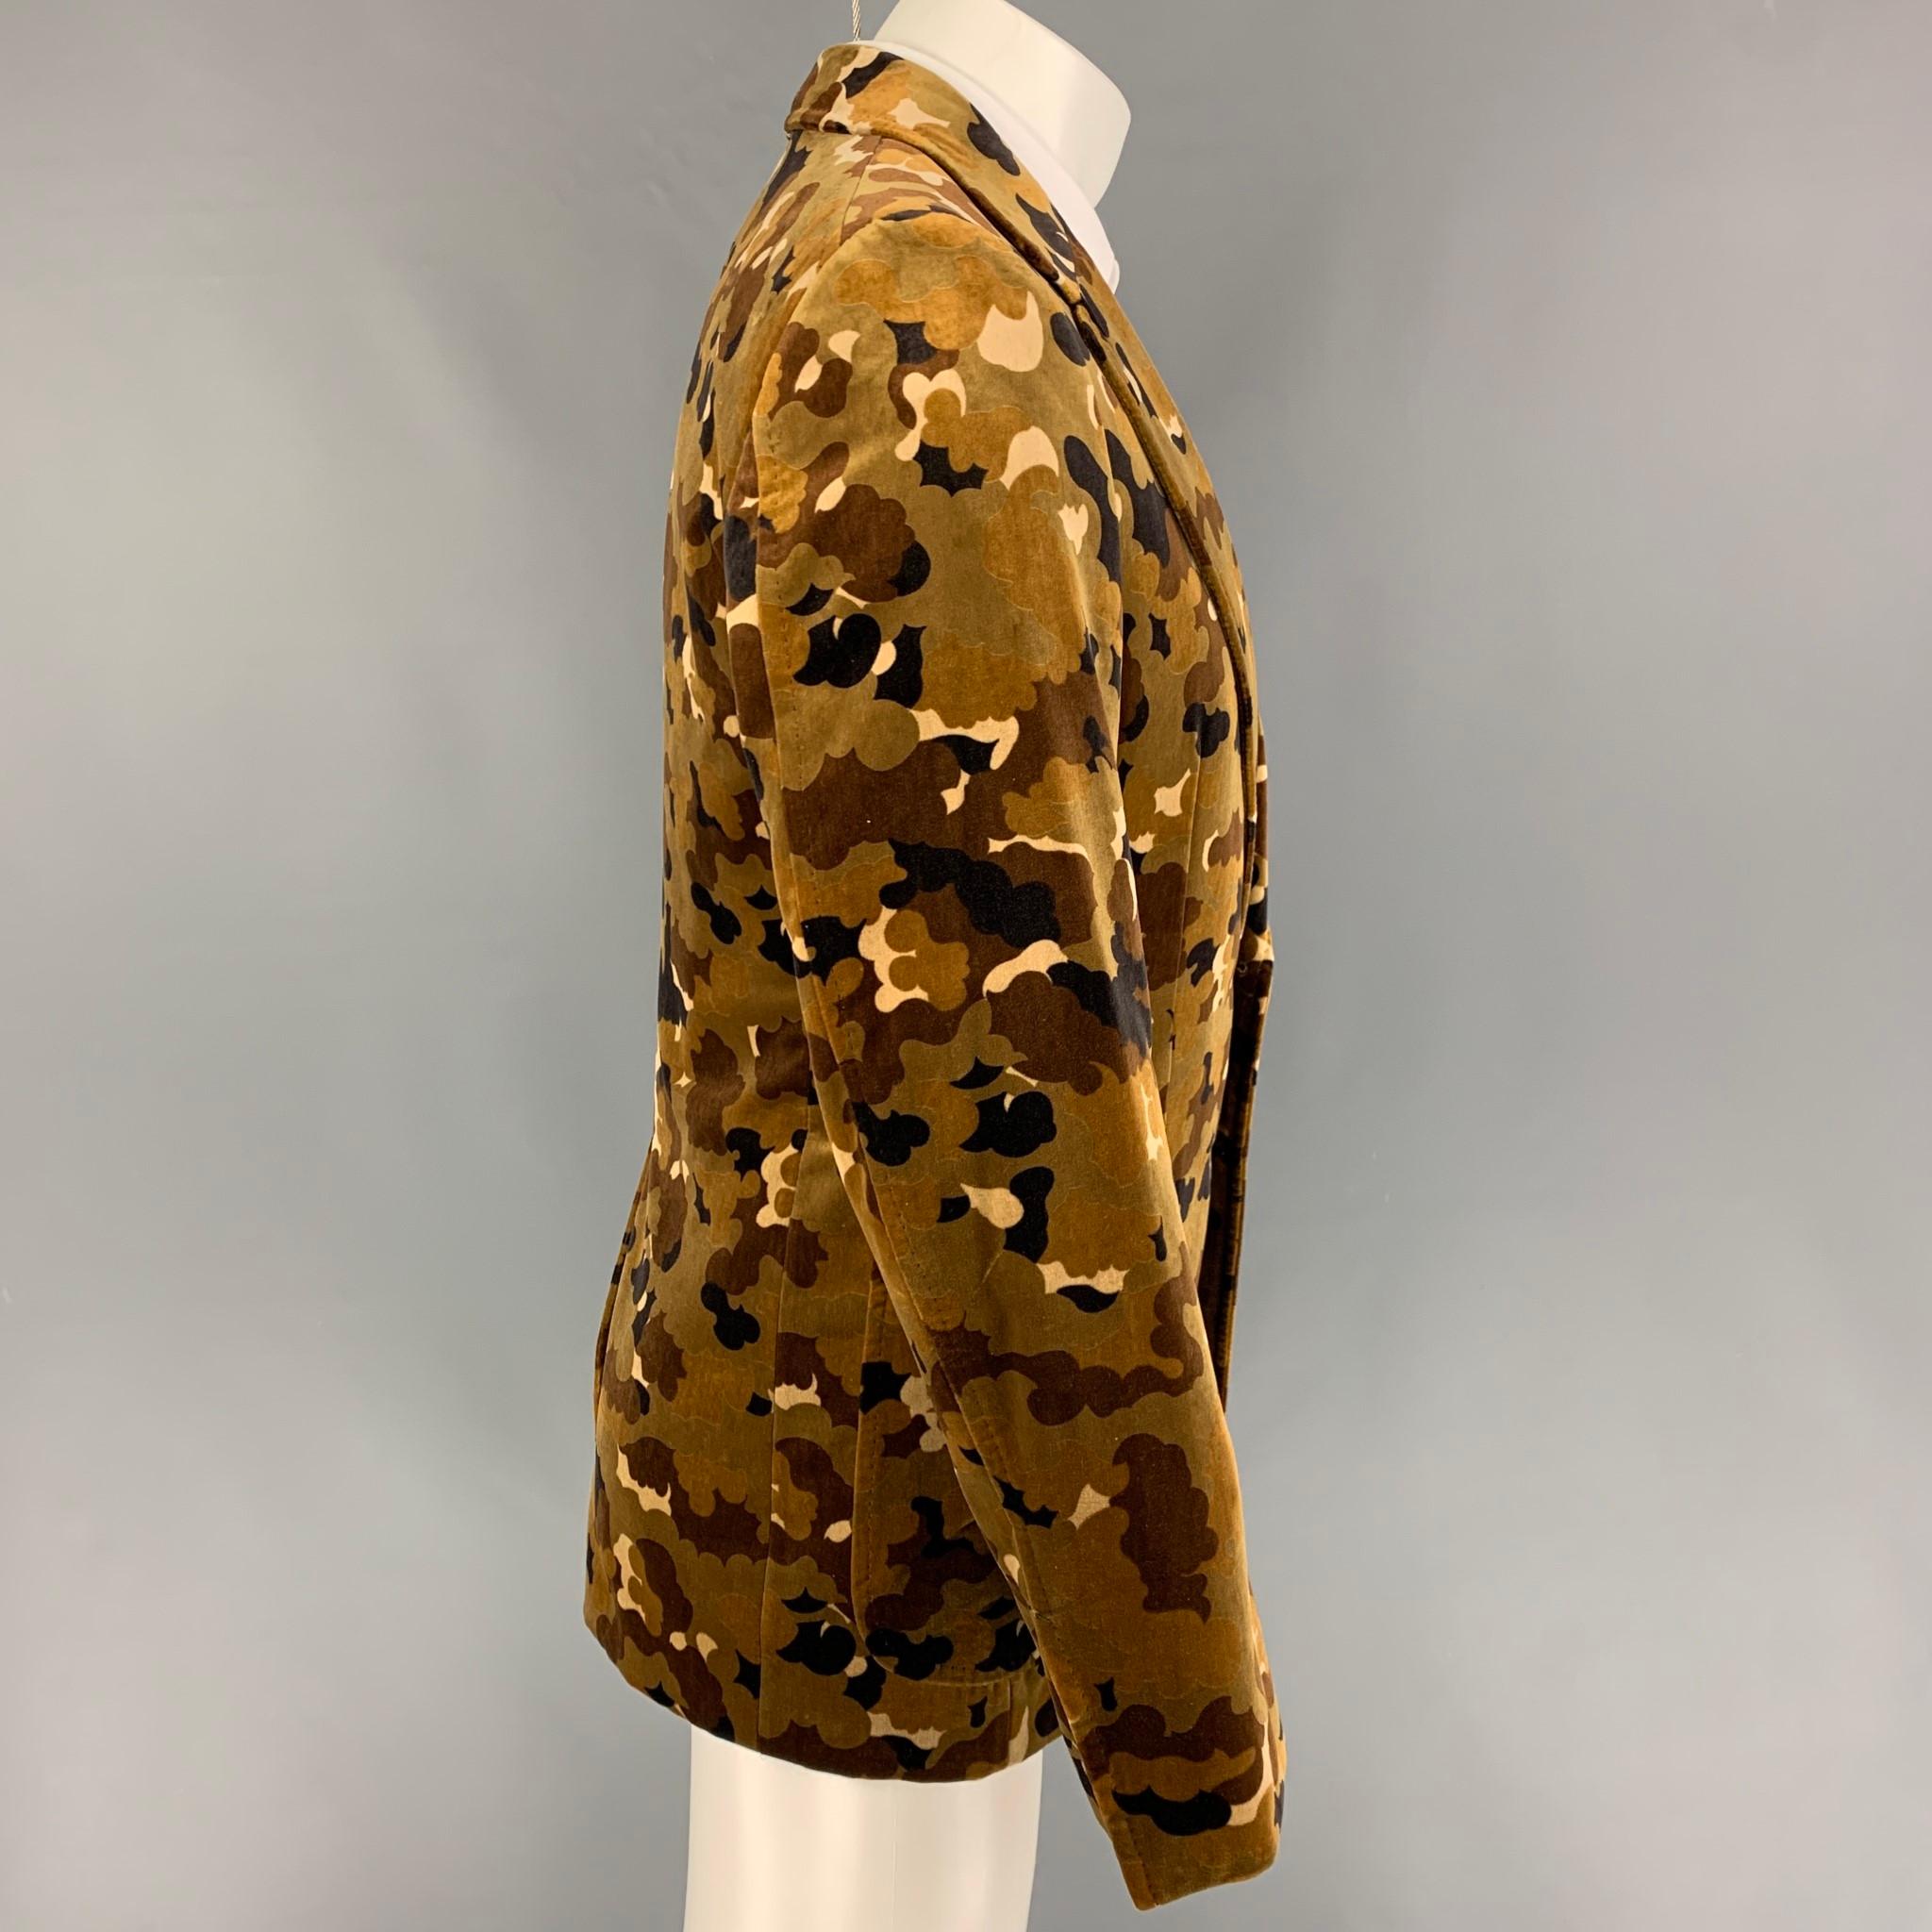 TOM FORD sport coat comes in a brown & tan camouflage cotton velvet with a full liner featuring a notch lapel, patch pockets, single back vent, and a double button closure. Made in Italy. 

Excellent Pre-Owned Condition.
Marked: 48